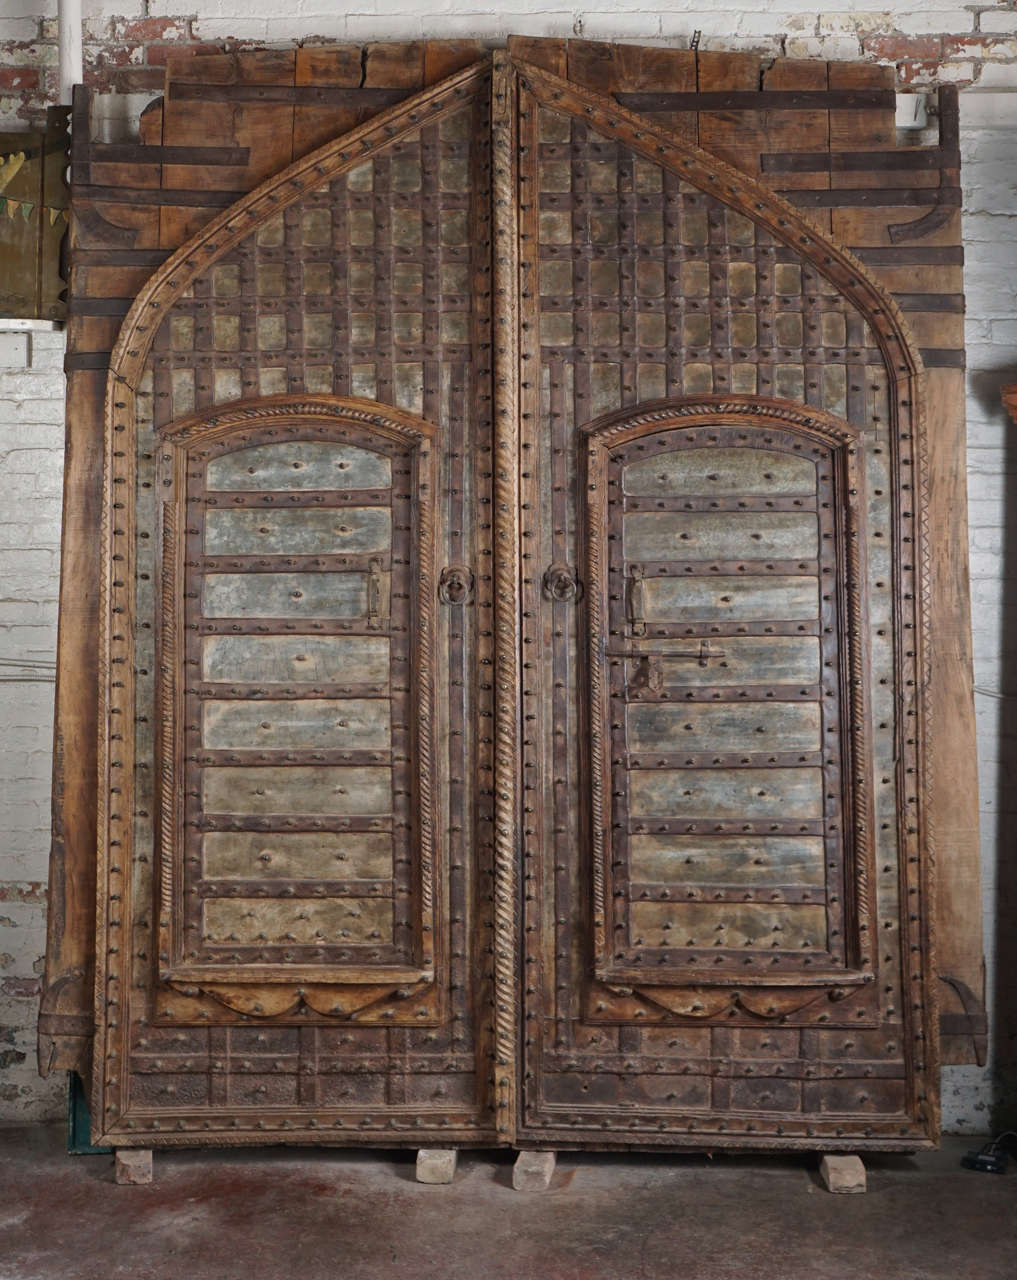 Monumental pair of hand carved teakwood garden doors riveted with iron pegs.